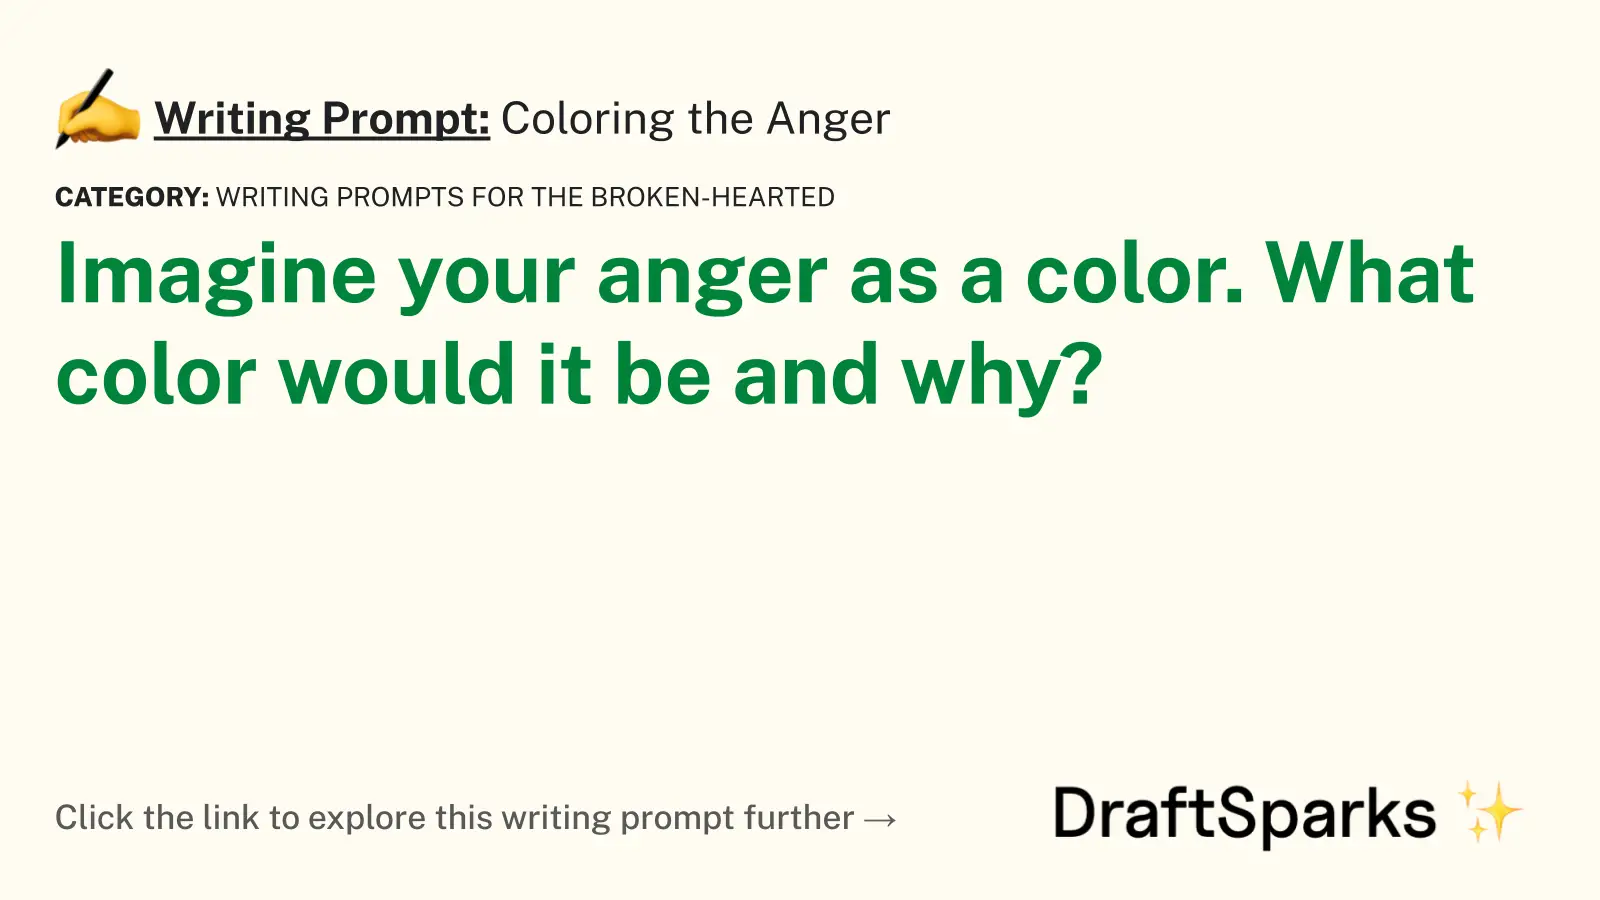 Coloring the Anger